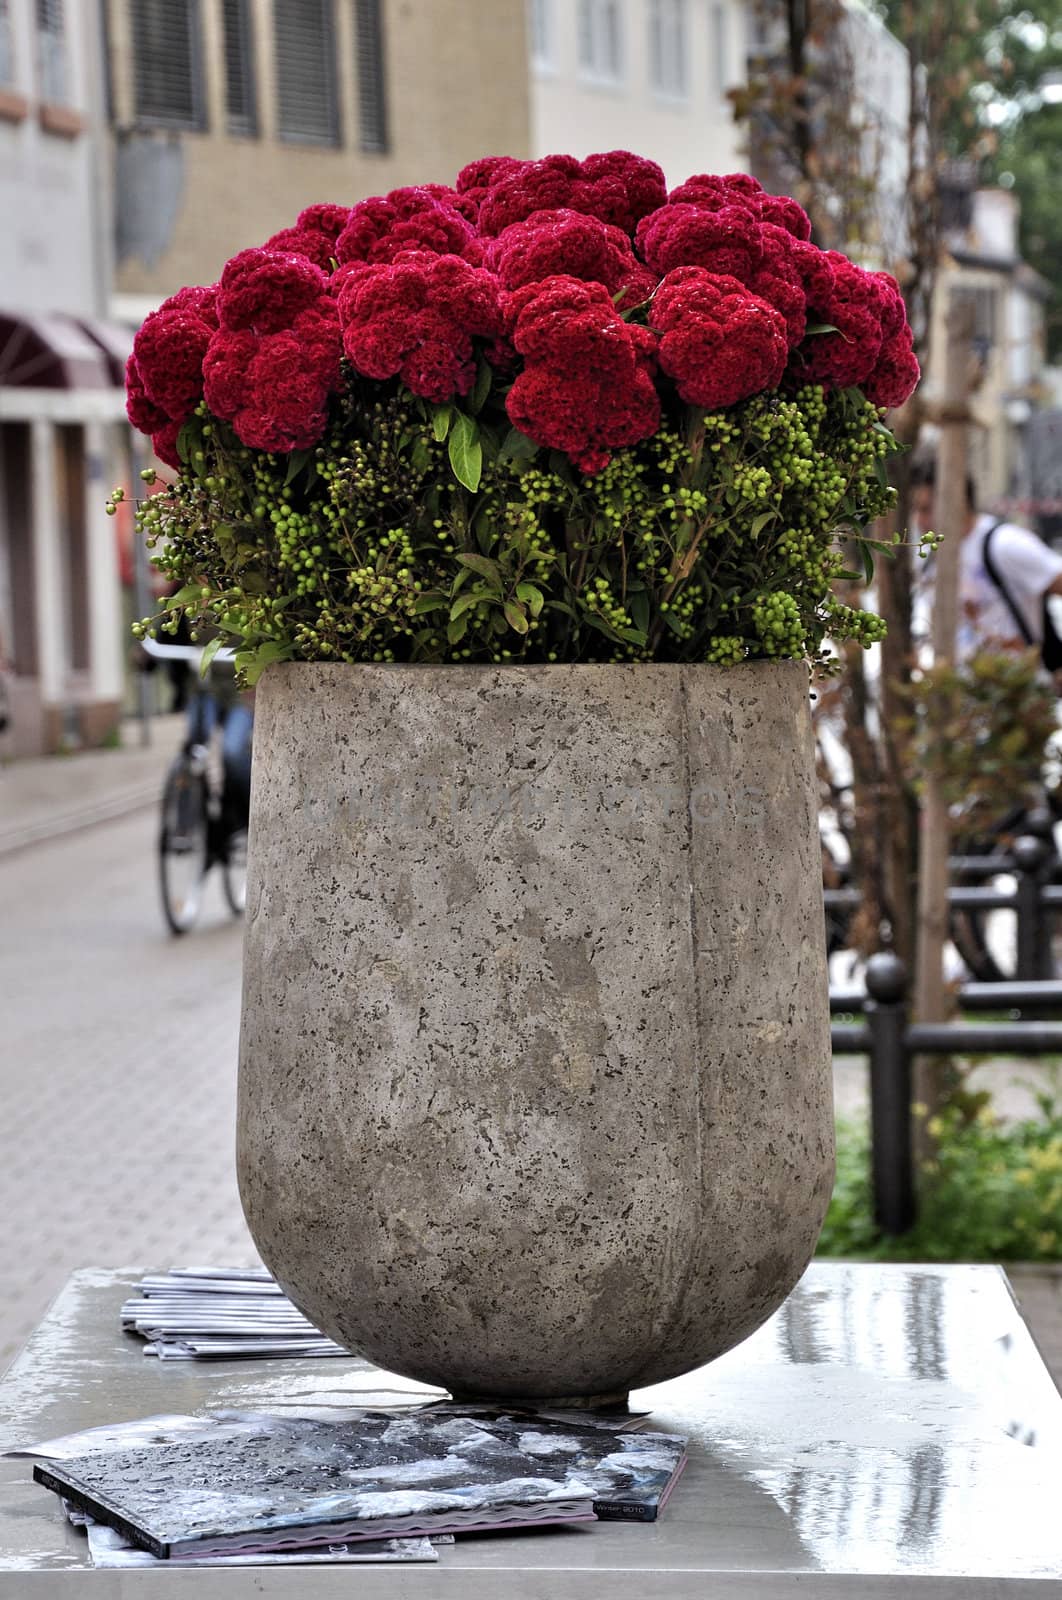 Beautiful red flowers in a vase on the table outside